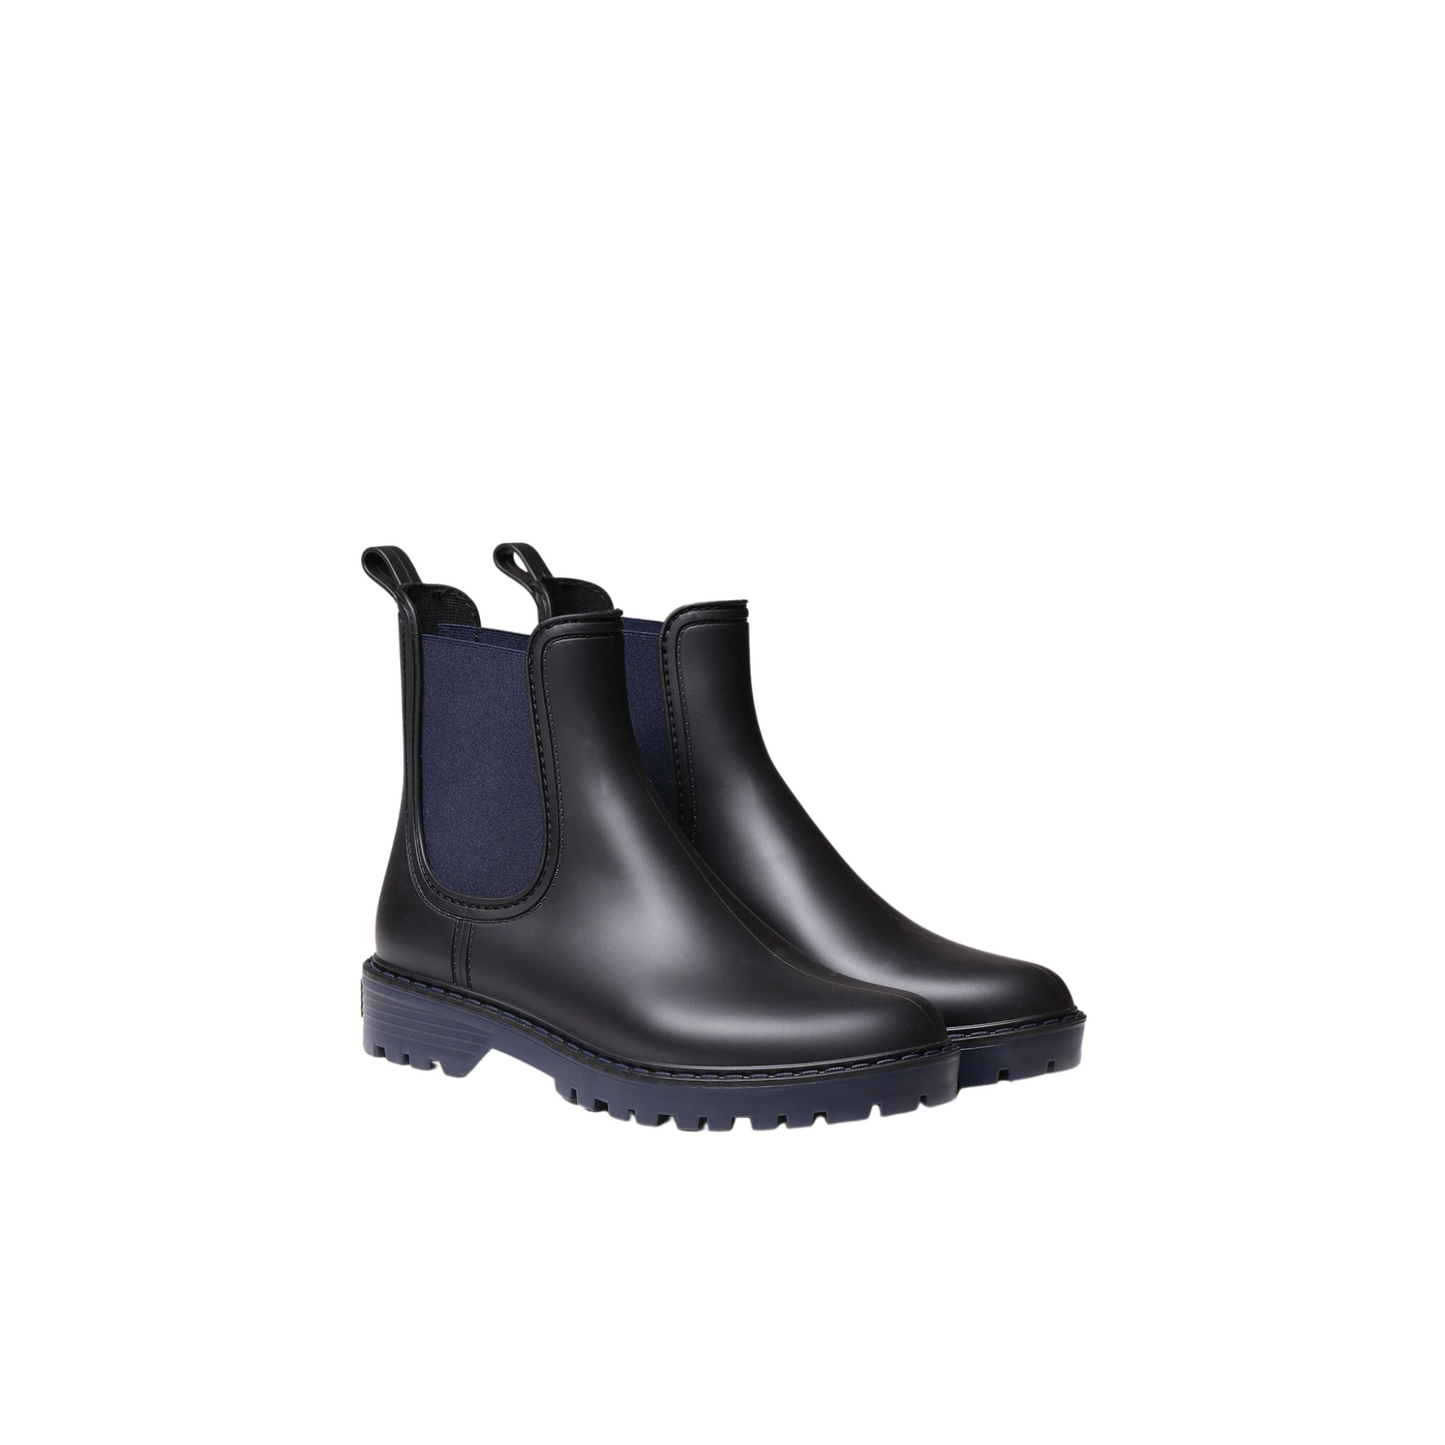 Front angled profiles of a pair of Toni Pons Cavour Boots in the colour Navy.